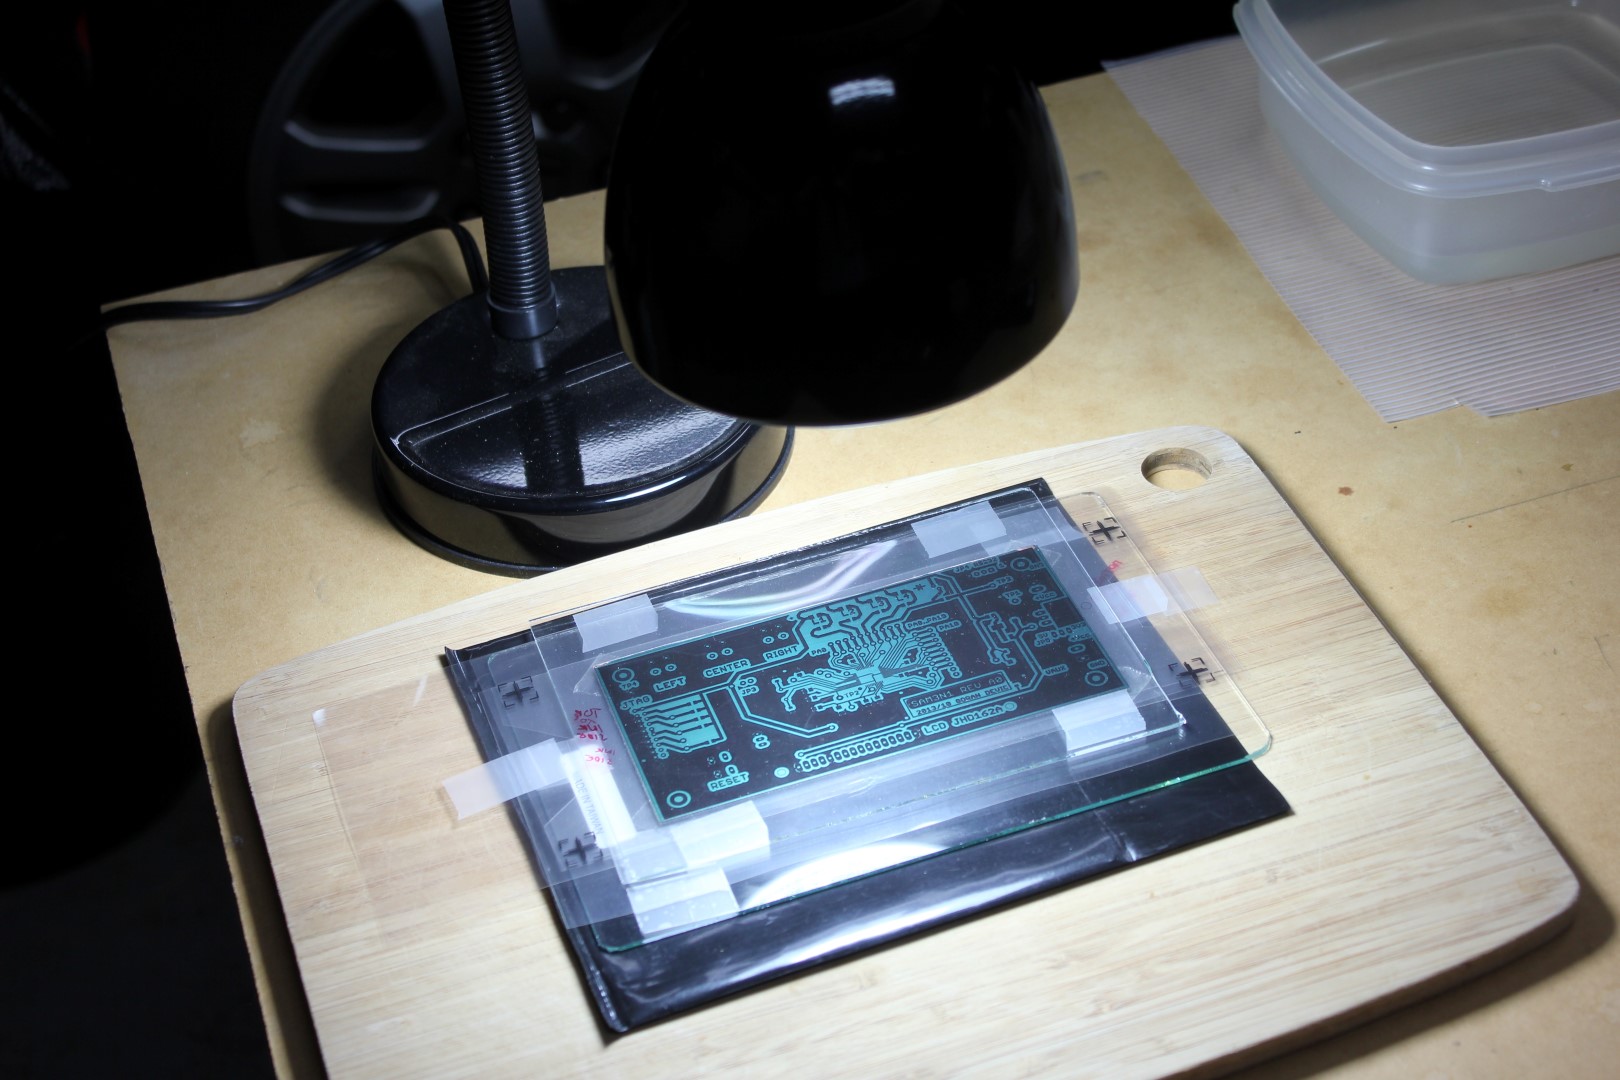 PCB exposure with developer ready (in the plastic container)